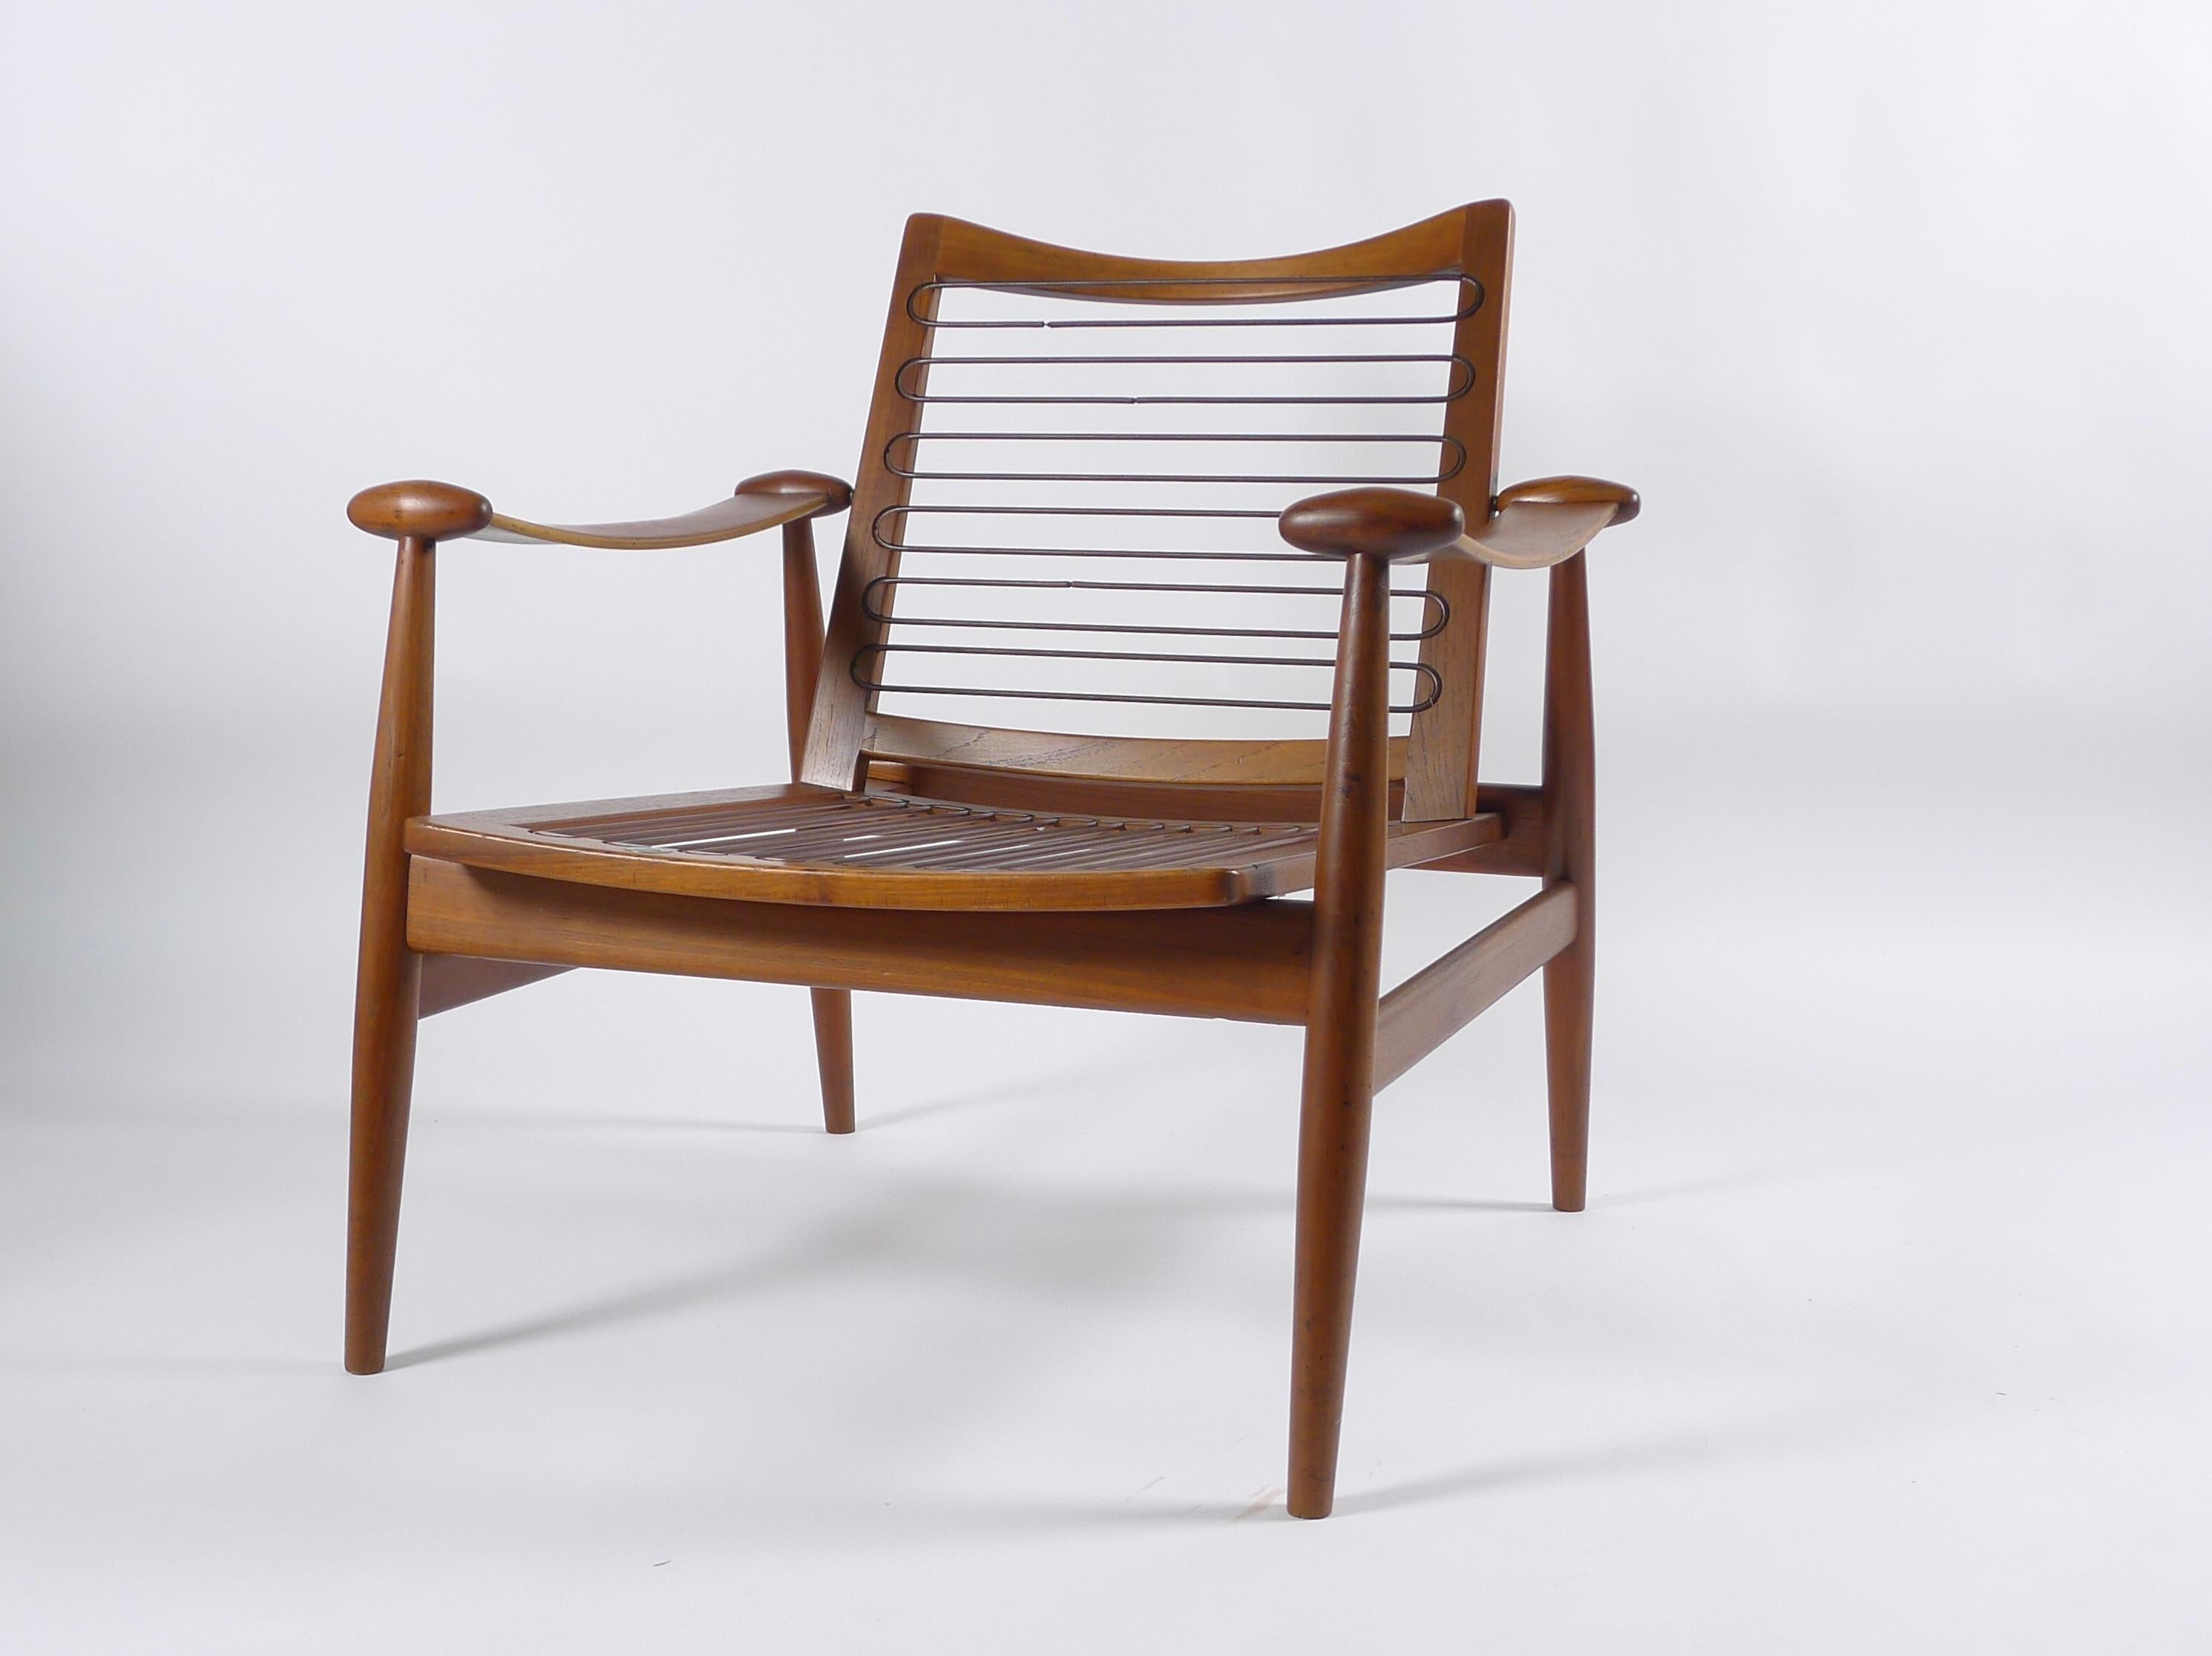 Finn Juhl Spade Chair, Model Fd133, 1950s, Produced by France & Son, with Label 5